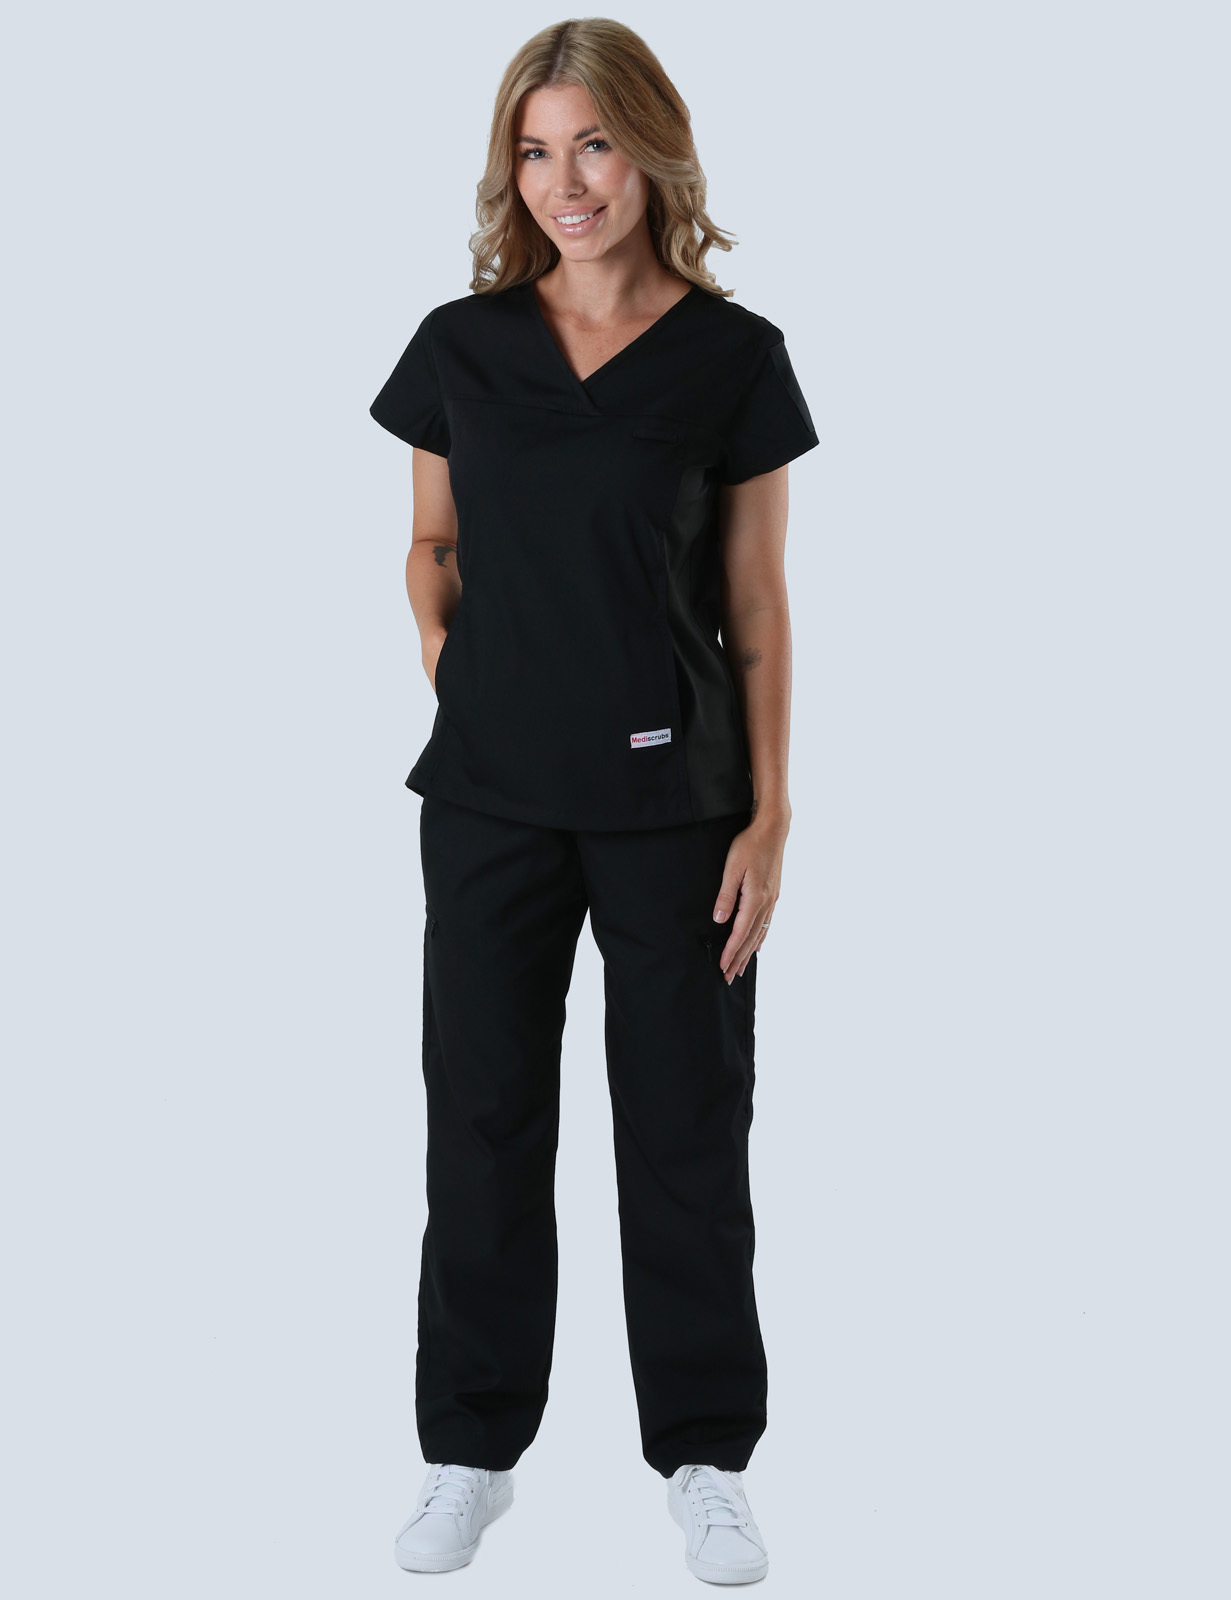 Women's Fit Solid Scrub Top With Spandex Panel - Black - 4X large